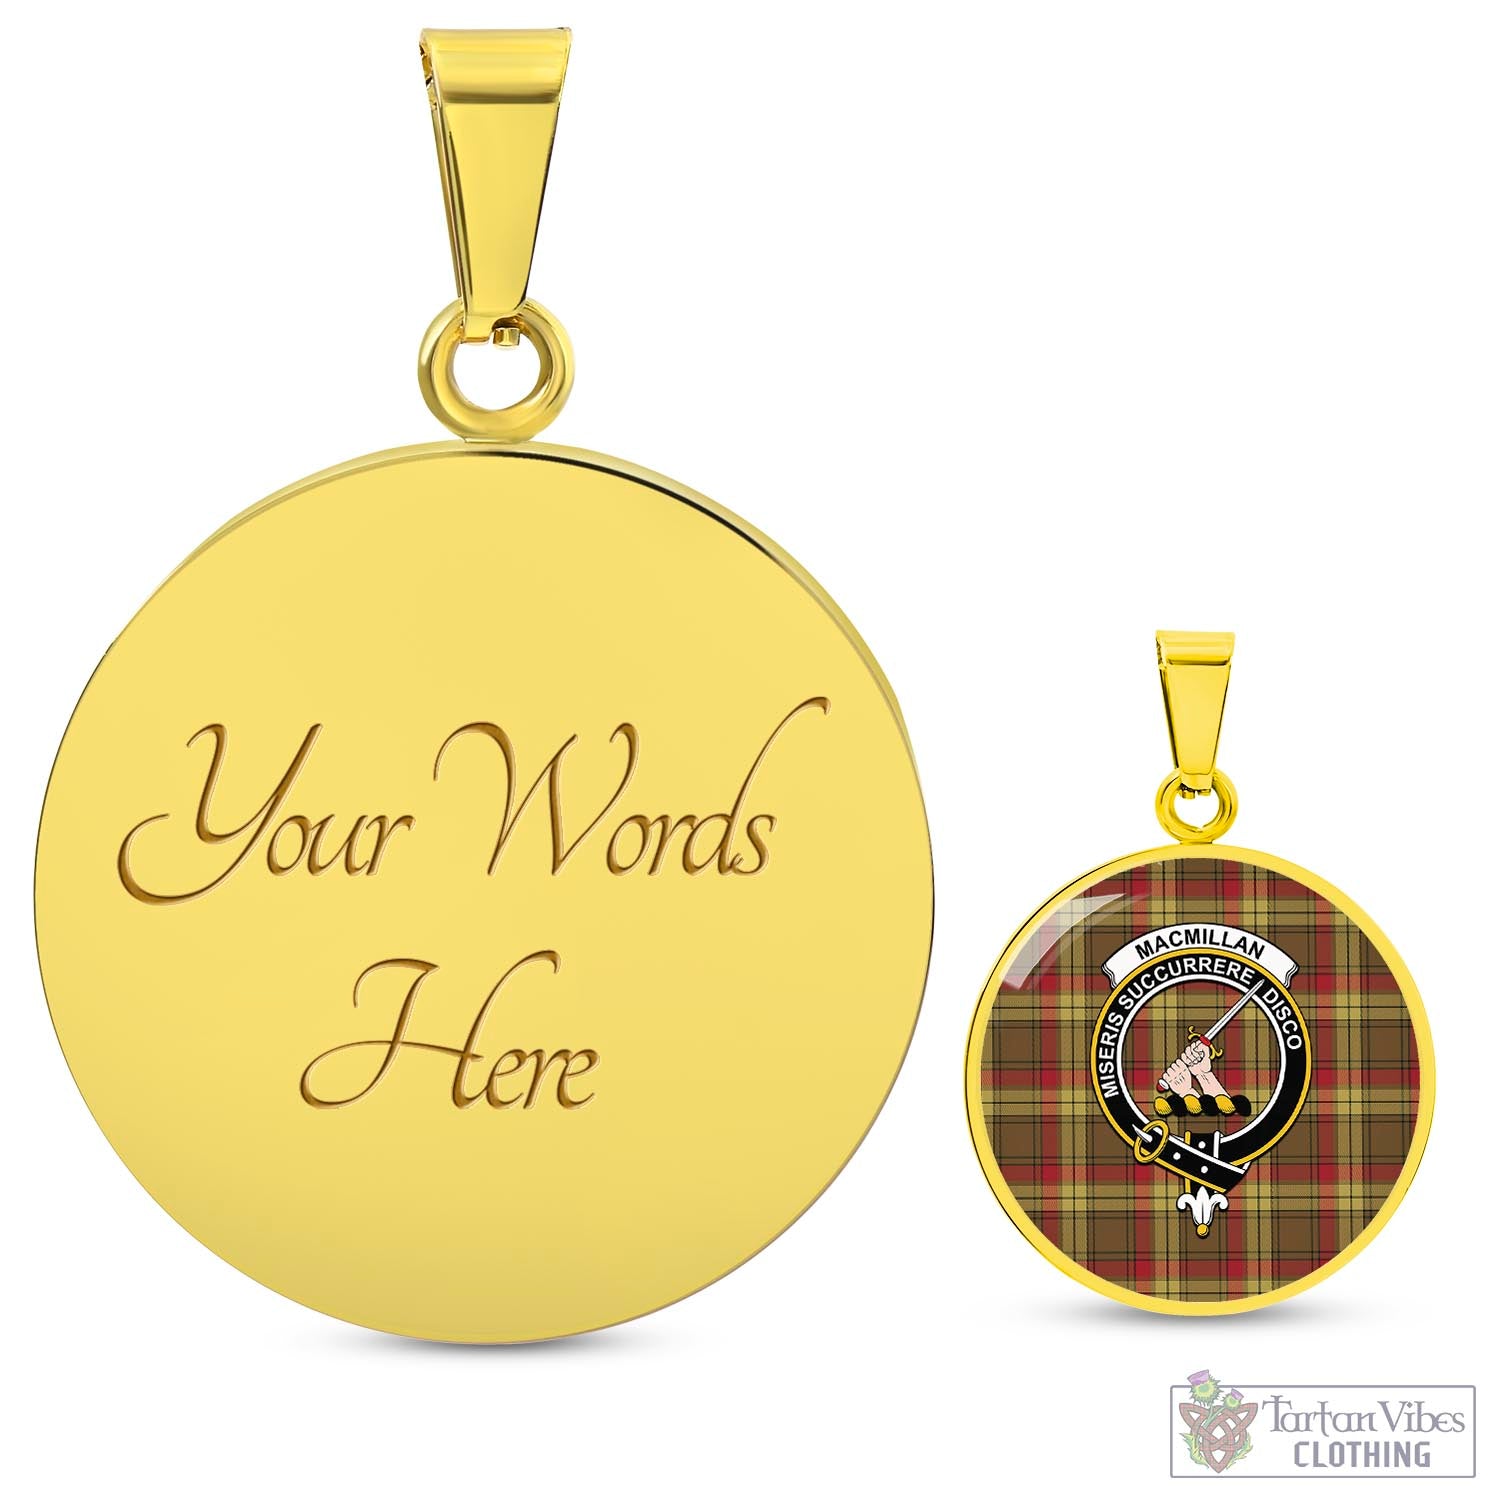 Tartan Vibes Clothing MacMillan Old Weathered Tartan Circle Necklace with Family Crest